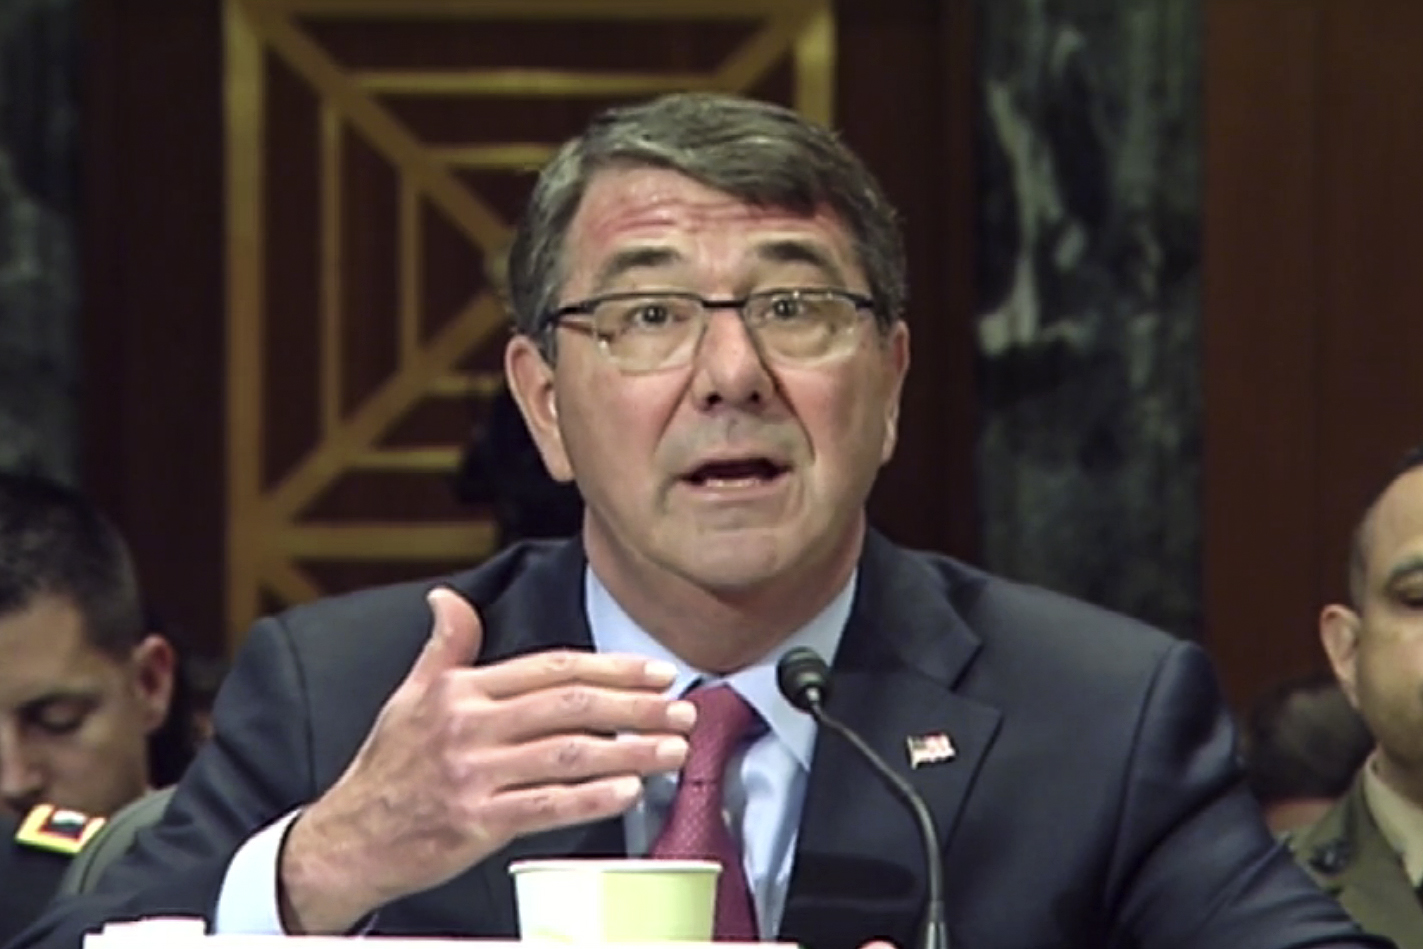 Defense Secretary Ash Carter testifies on defense posture before the Senate Appropriations Committee's defense subcommittee in Washington, D.C., May 6, 2015. Army Gen. Martin E. Dempsey, chairman of the Joint Chiefs of Staff, also testified during the hearing. DoD screen shot